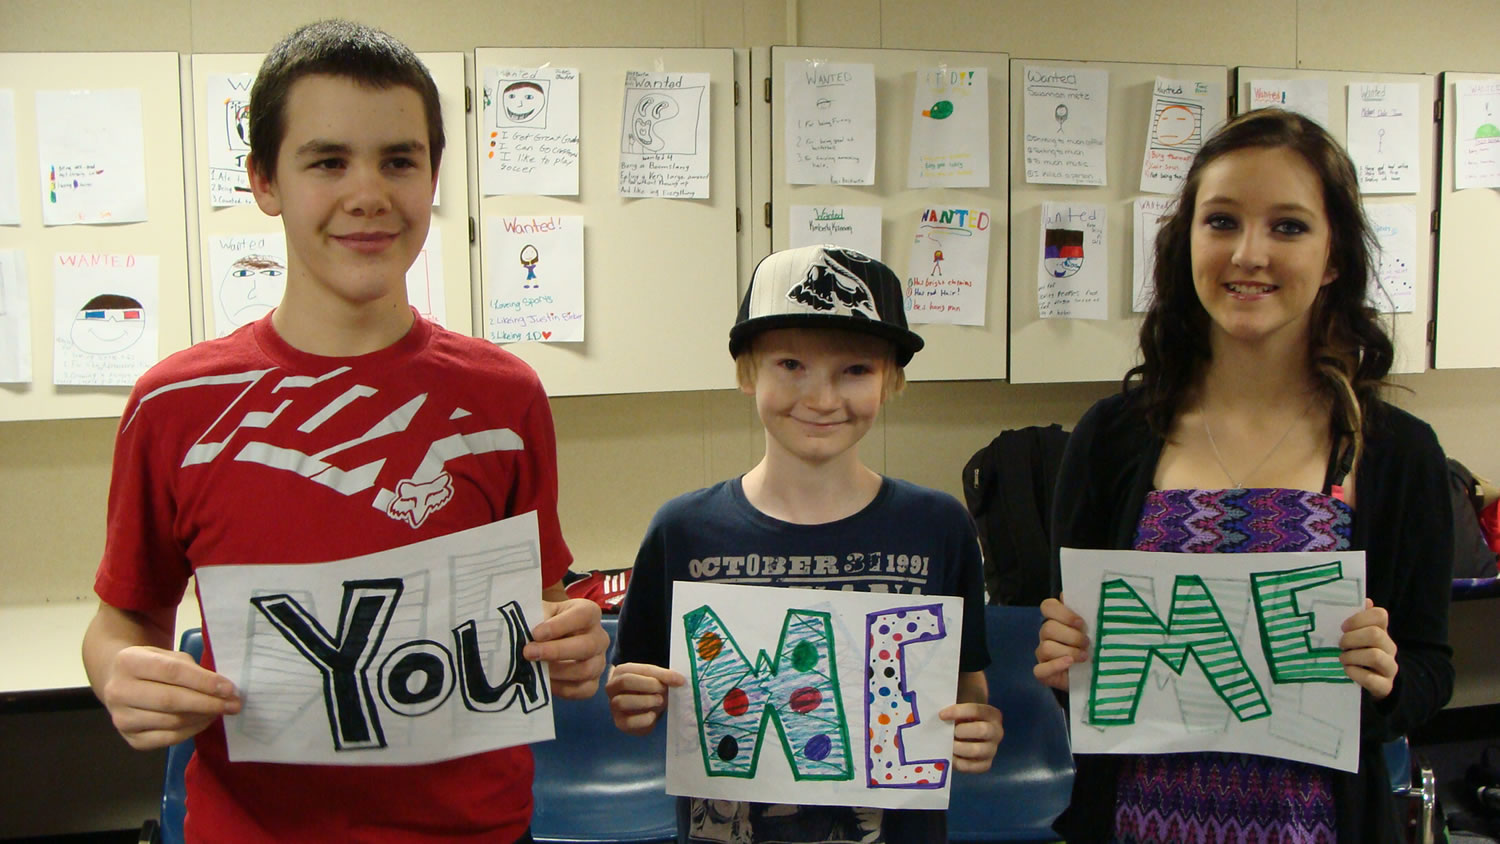 Jemtegaard Middle School students (left to right) Corey Barton, Casey Schulenbarger and Kim Kanning hold signs which accompany a poem for their anti-bullying performance, based on the T.V.